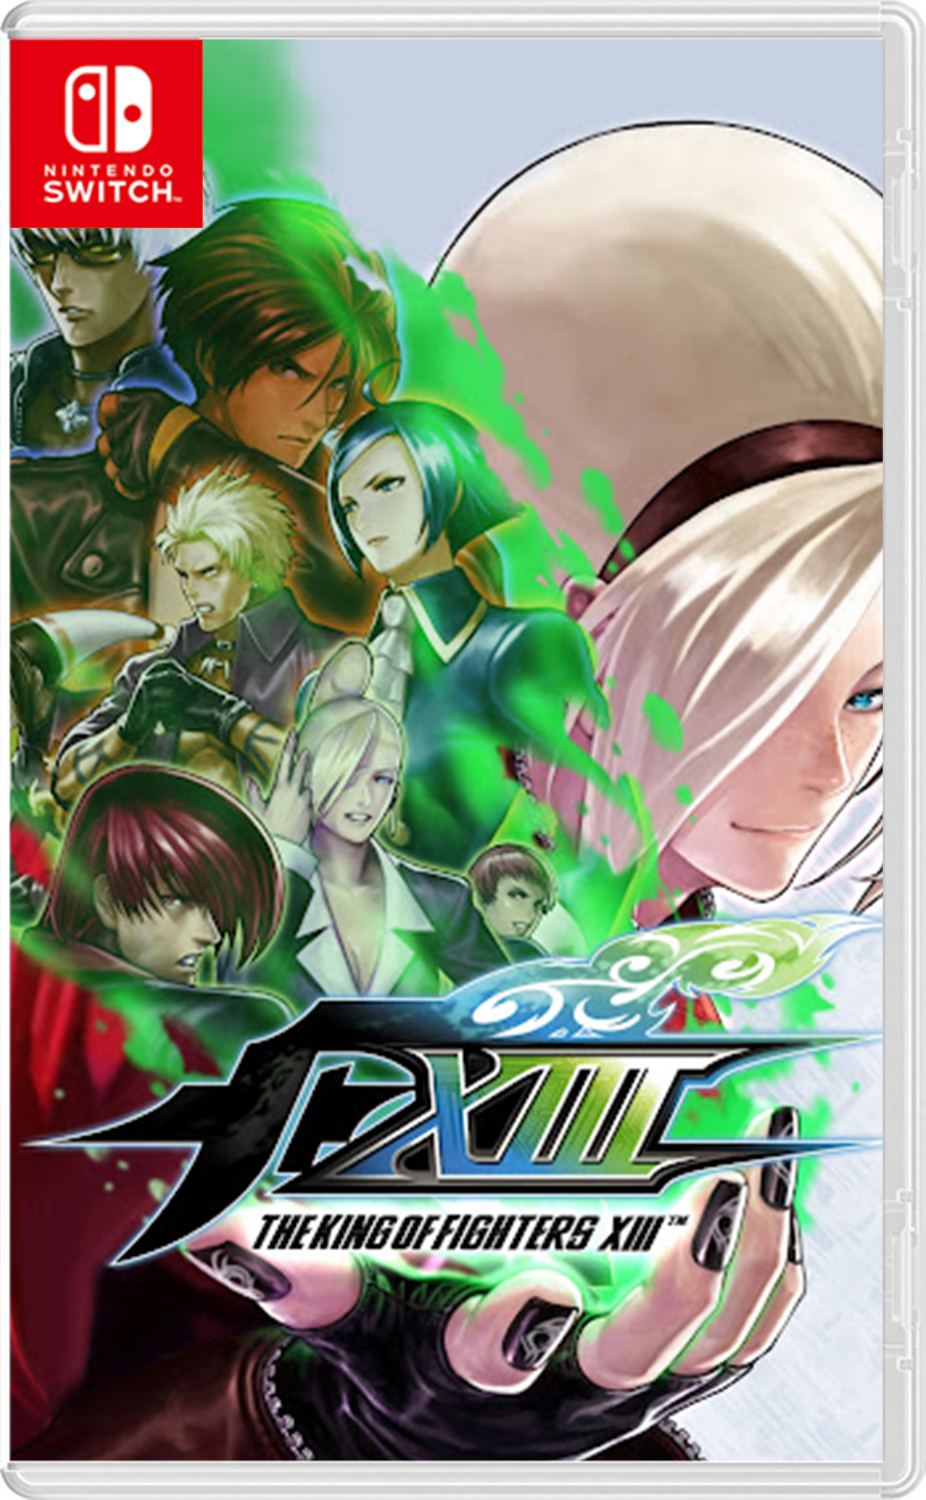 THE KING OF FIGHTERS XIII GLOBAL MATCH Deluxe Edition for Nintendo Switch -  Nintendo Official Site